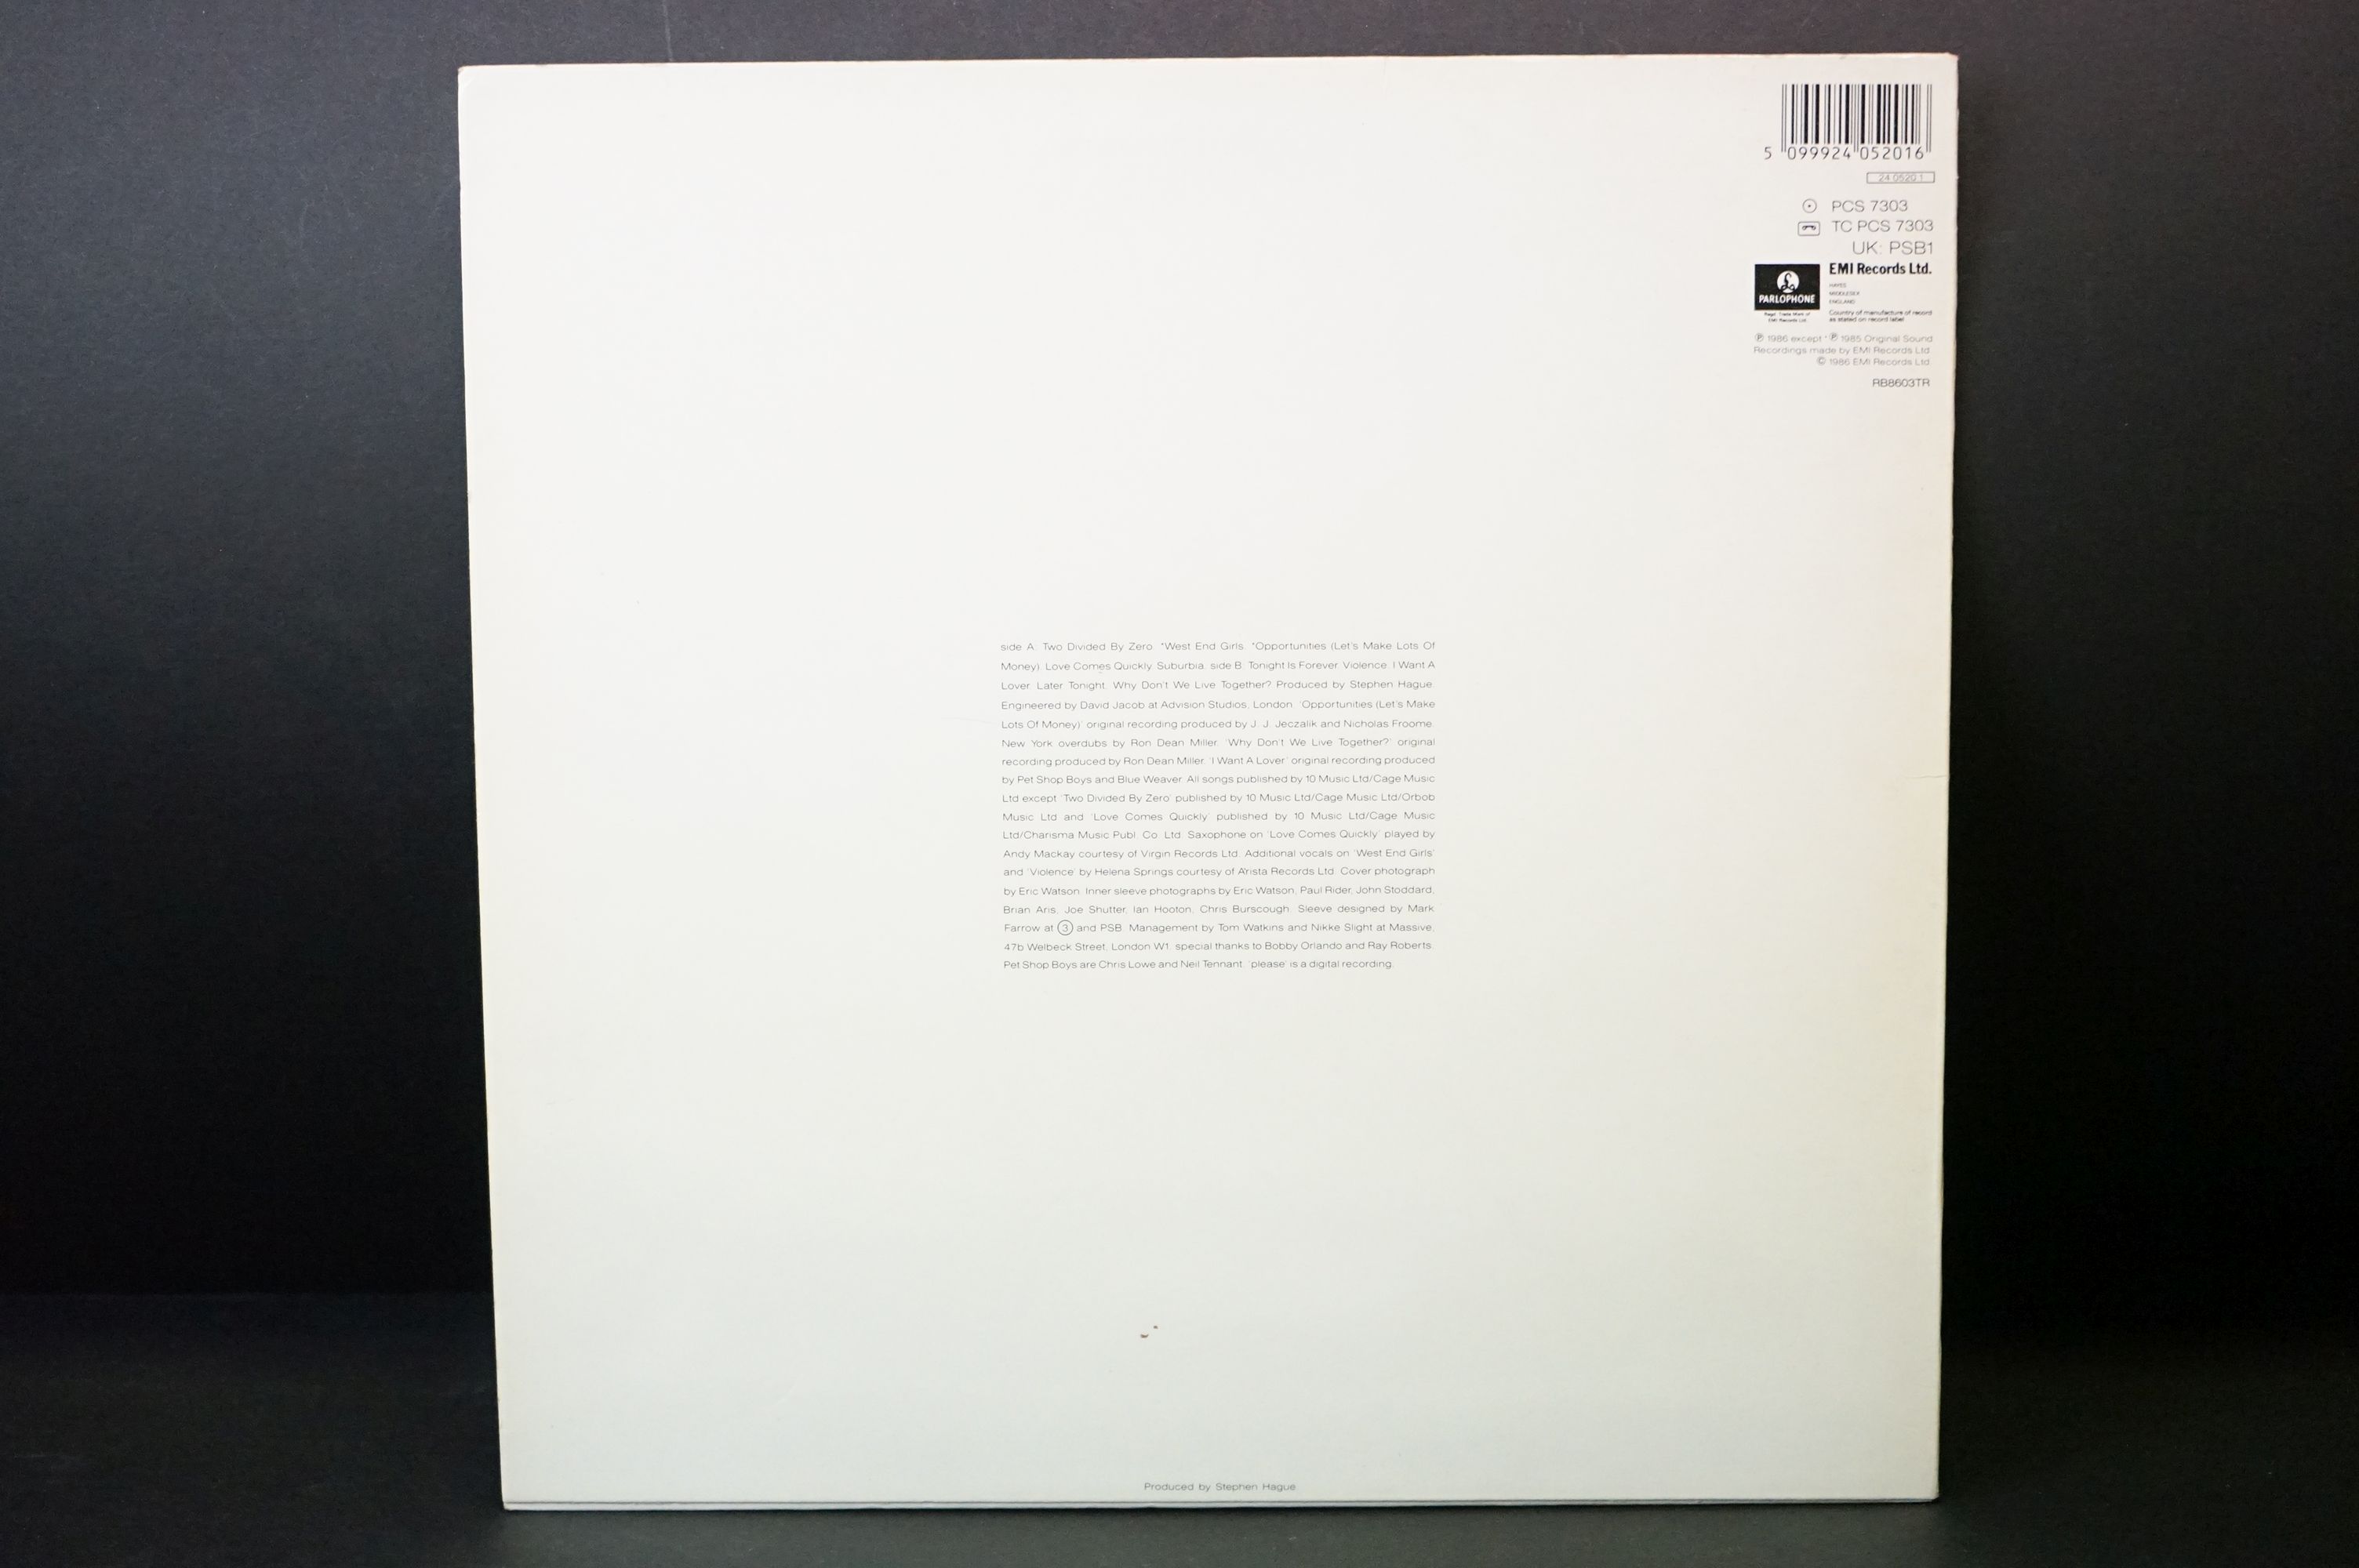 Vinyl - 5 Pet Shop Boys LPs and 1 12" single to include Disco, Introspective, Please, Actually, - Image 12 of 18